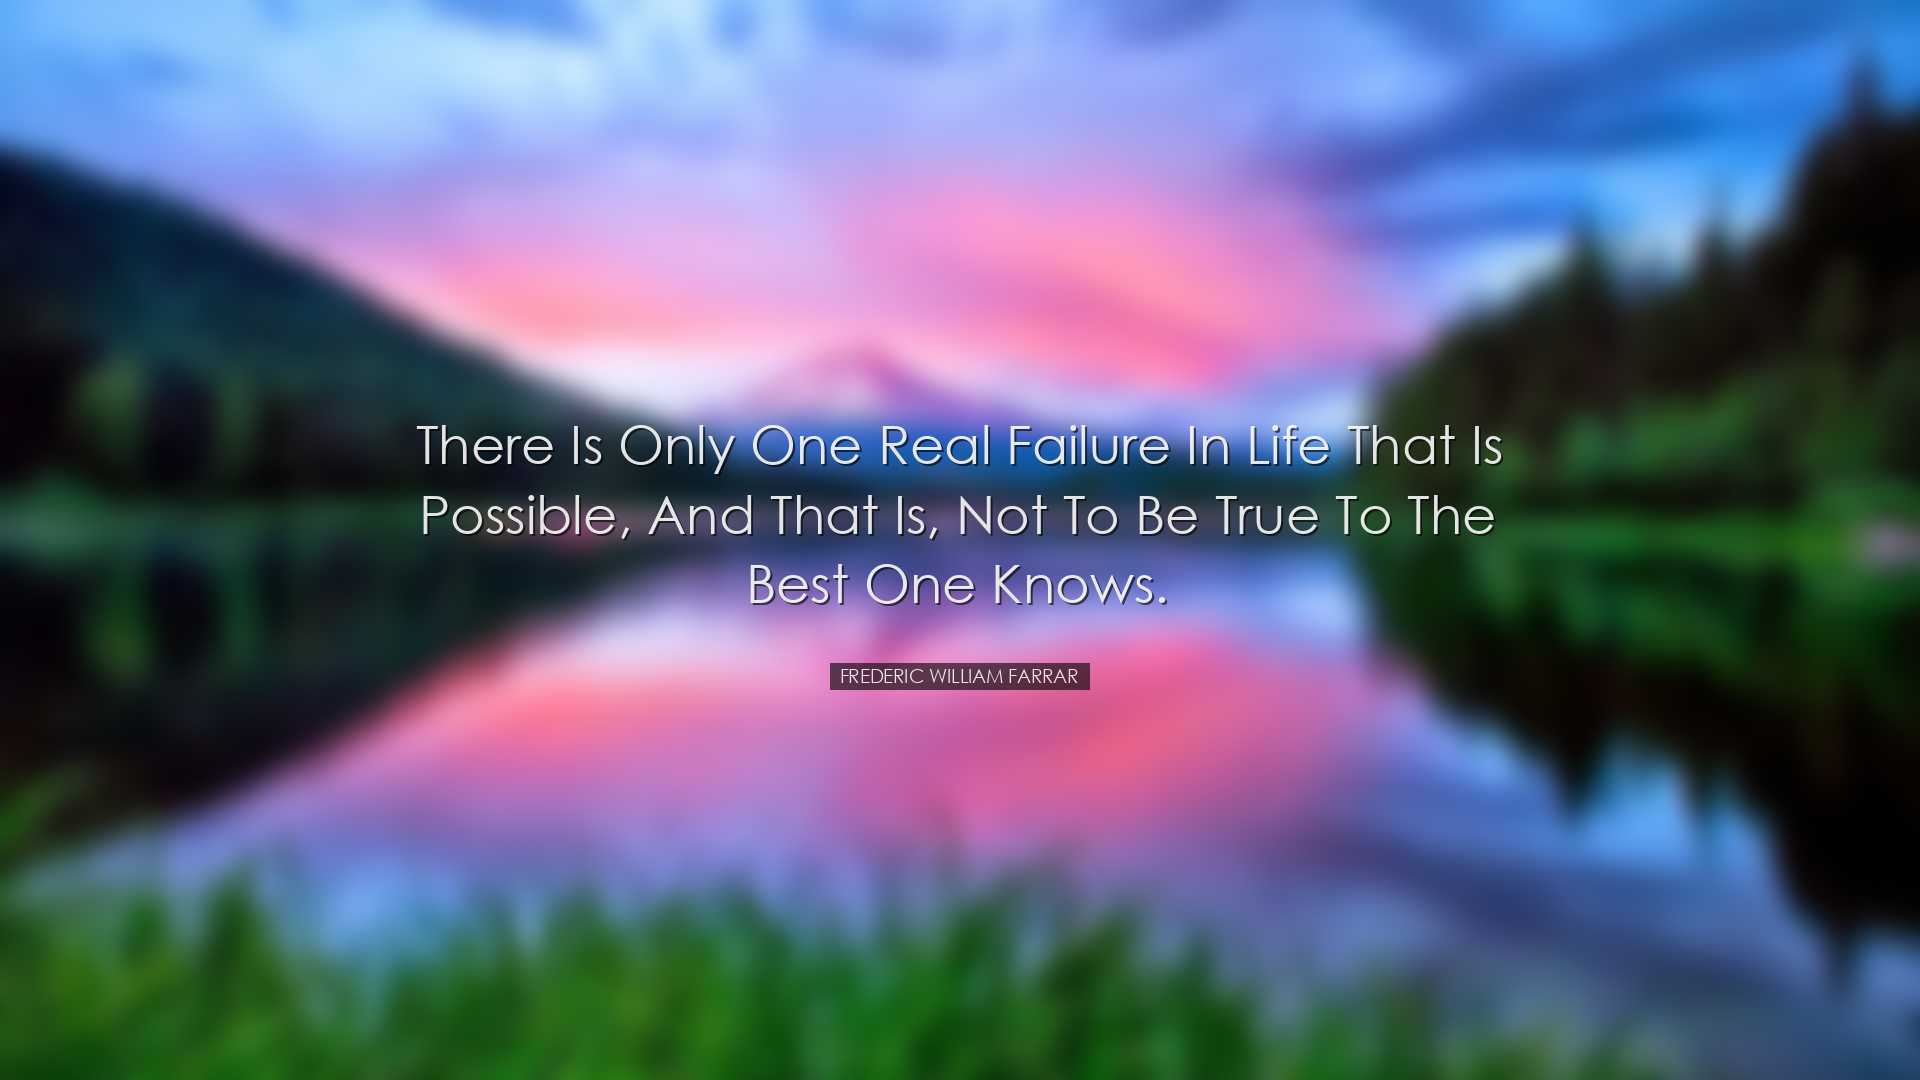 There is only one real failure in life that is possible, and that